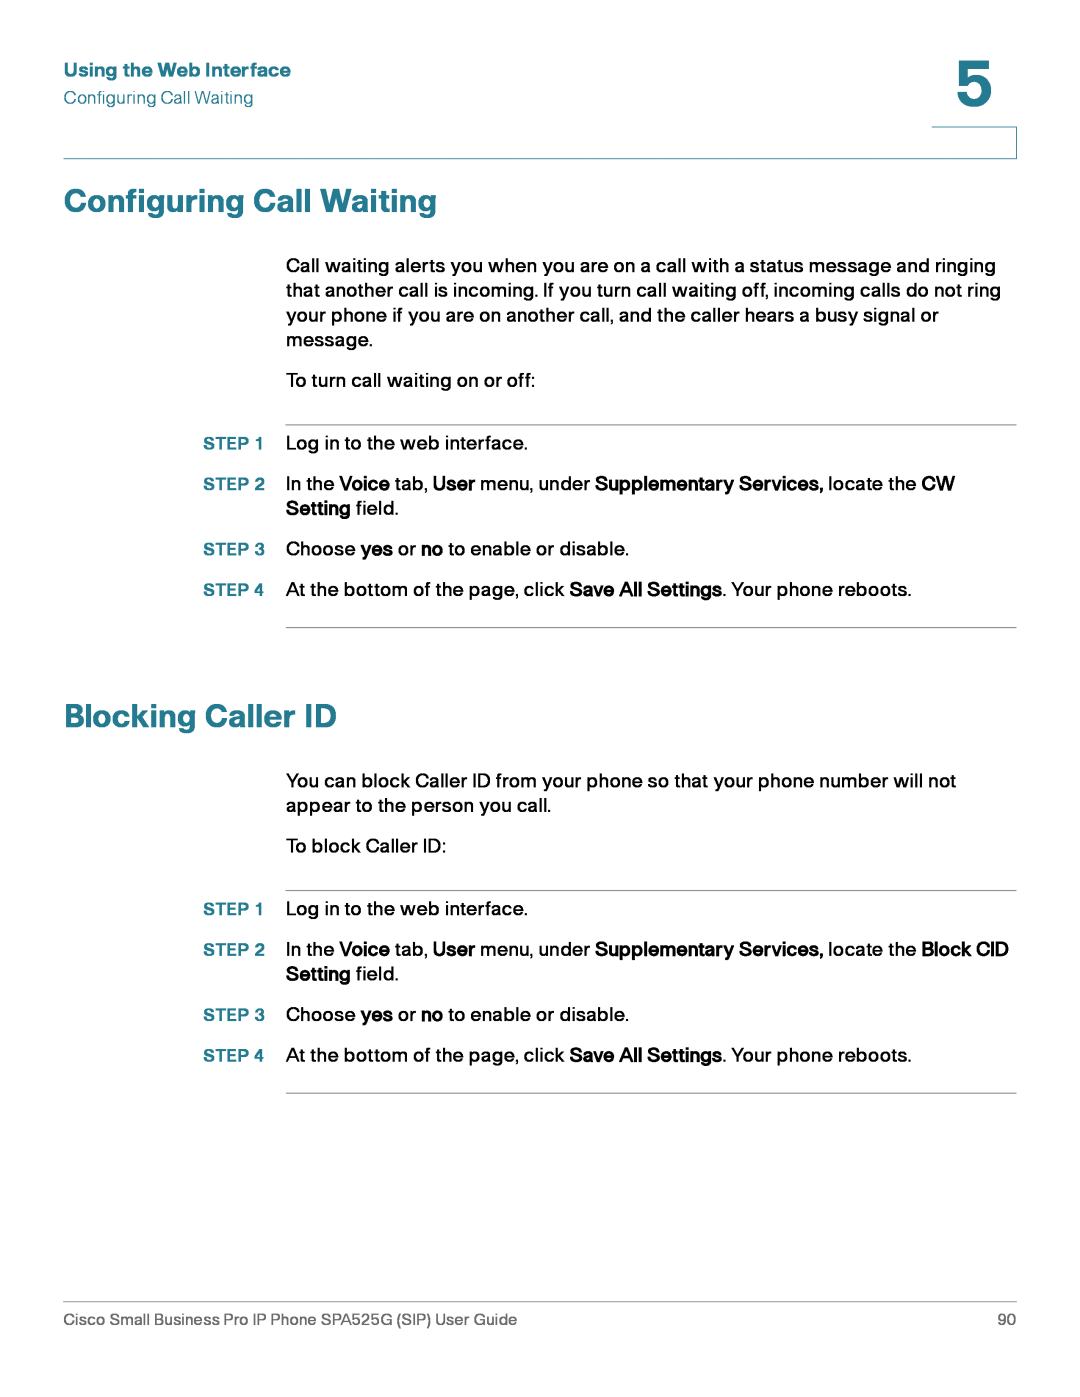 Cisco Systems SPA525G manual Blocking Caller ID, Configuring Call Waiting, Using the Web Interface 